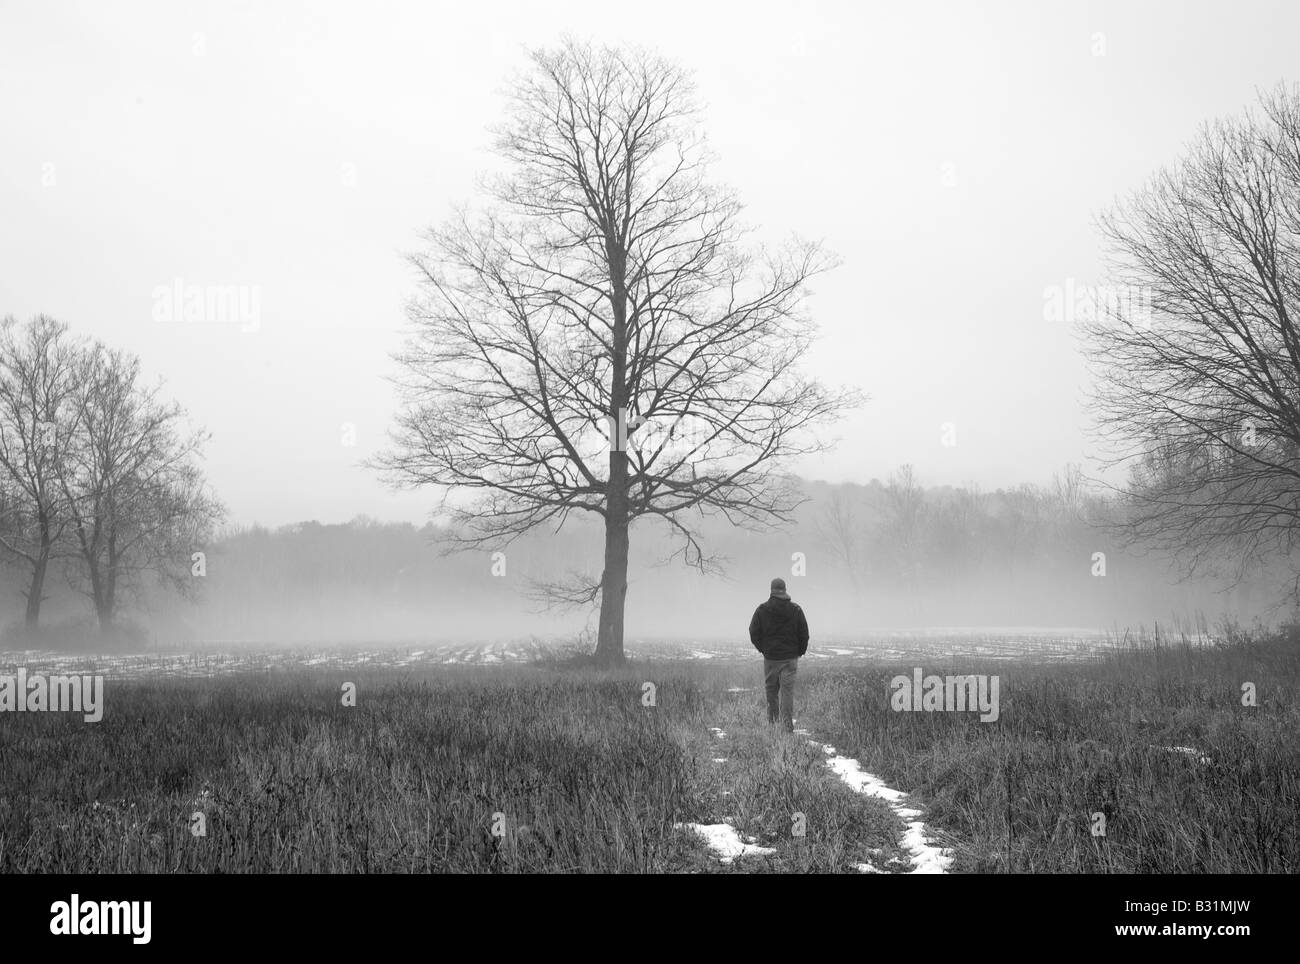 Mysterious figure walks through a misty landscape with ethereal tree Stock Photo